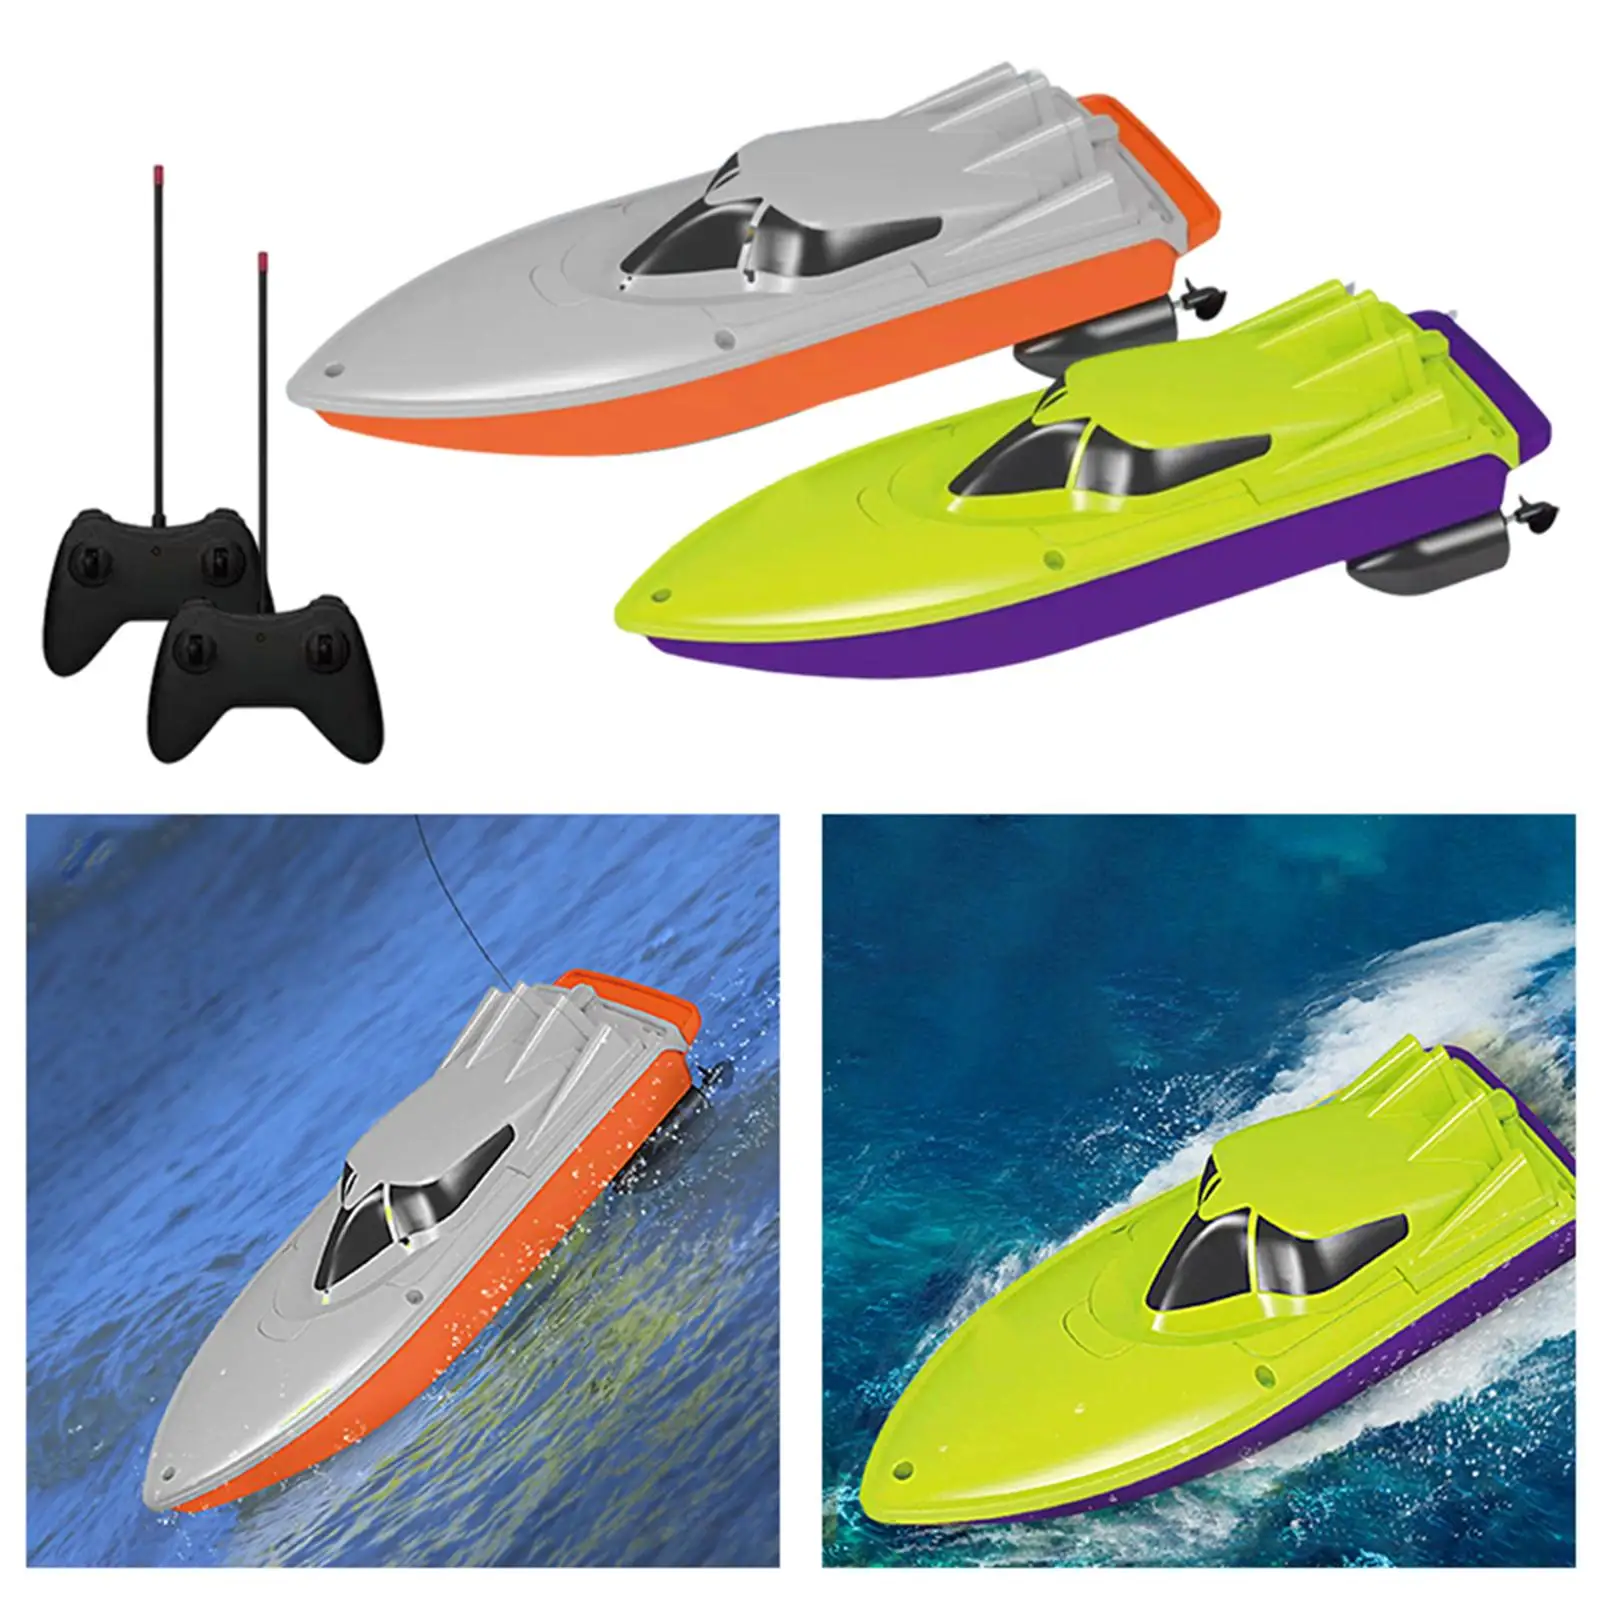 Remote Control Boat Electric Ship Yacht Toys High Powerful for River, Pools, Lakes,